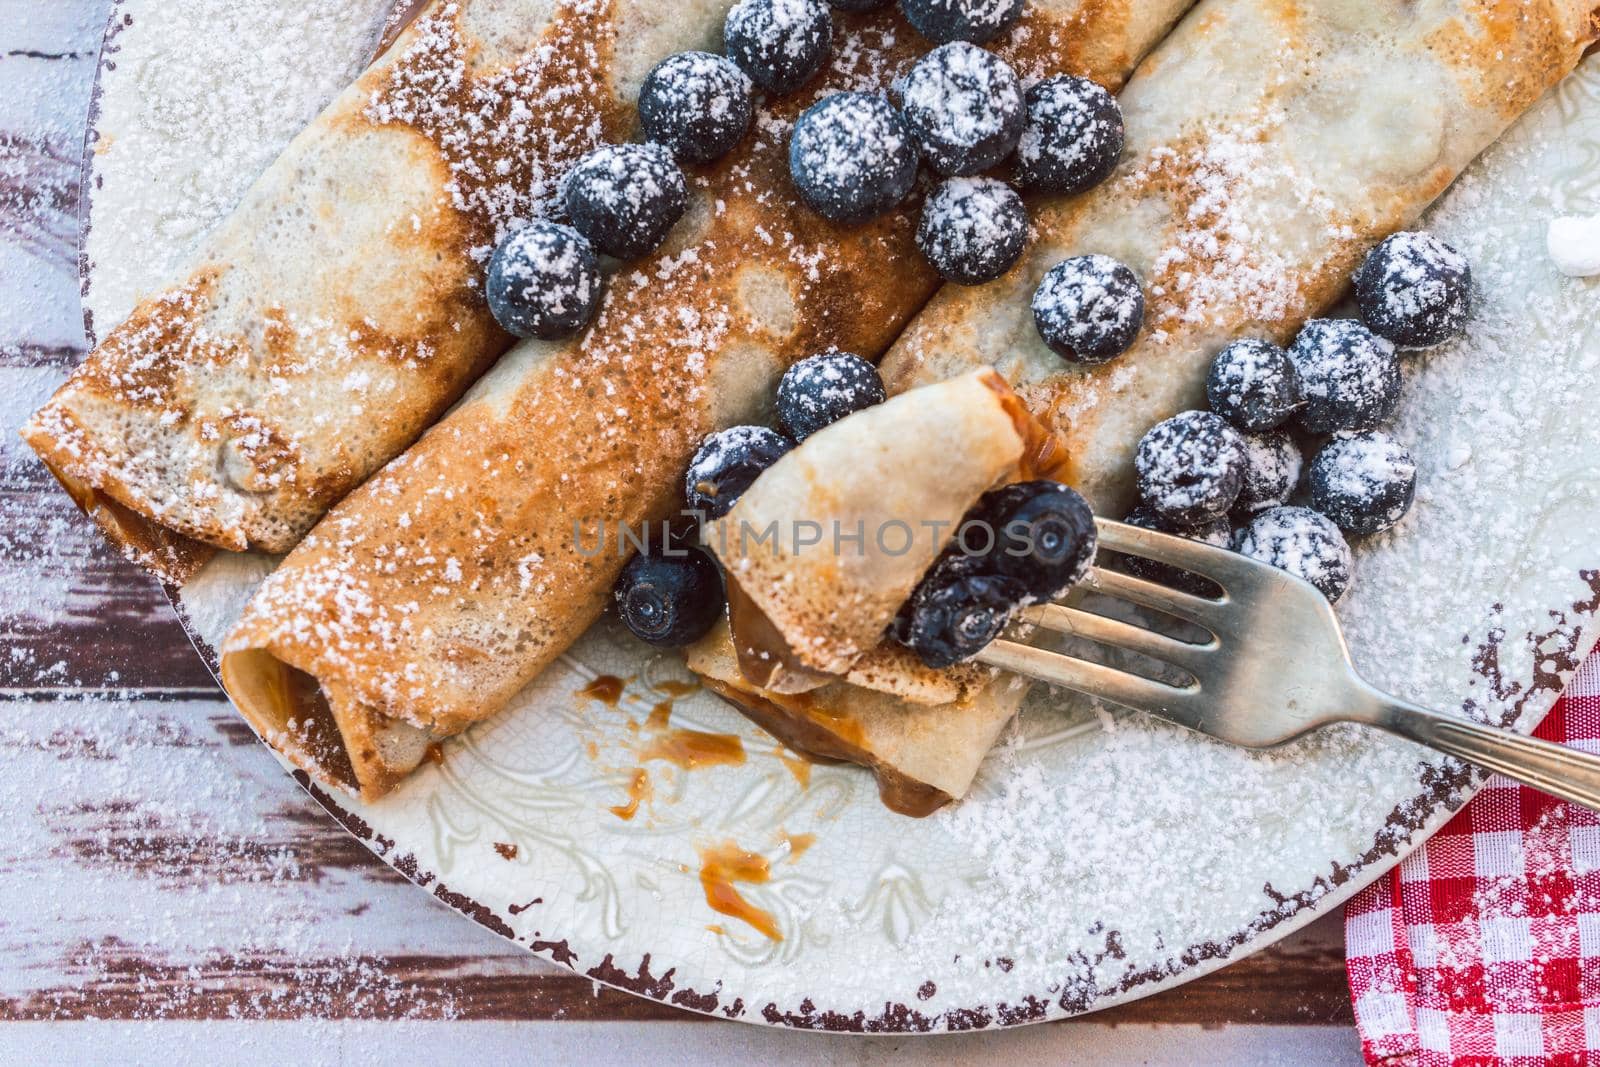 Dish with delicious homemade pancakes or crepes filled with dulce de leche. Fork with a bite and some spiked blueberries. Close up. high view.